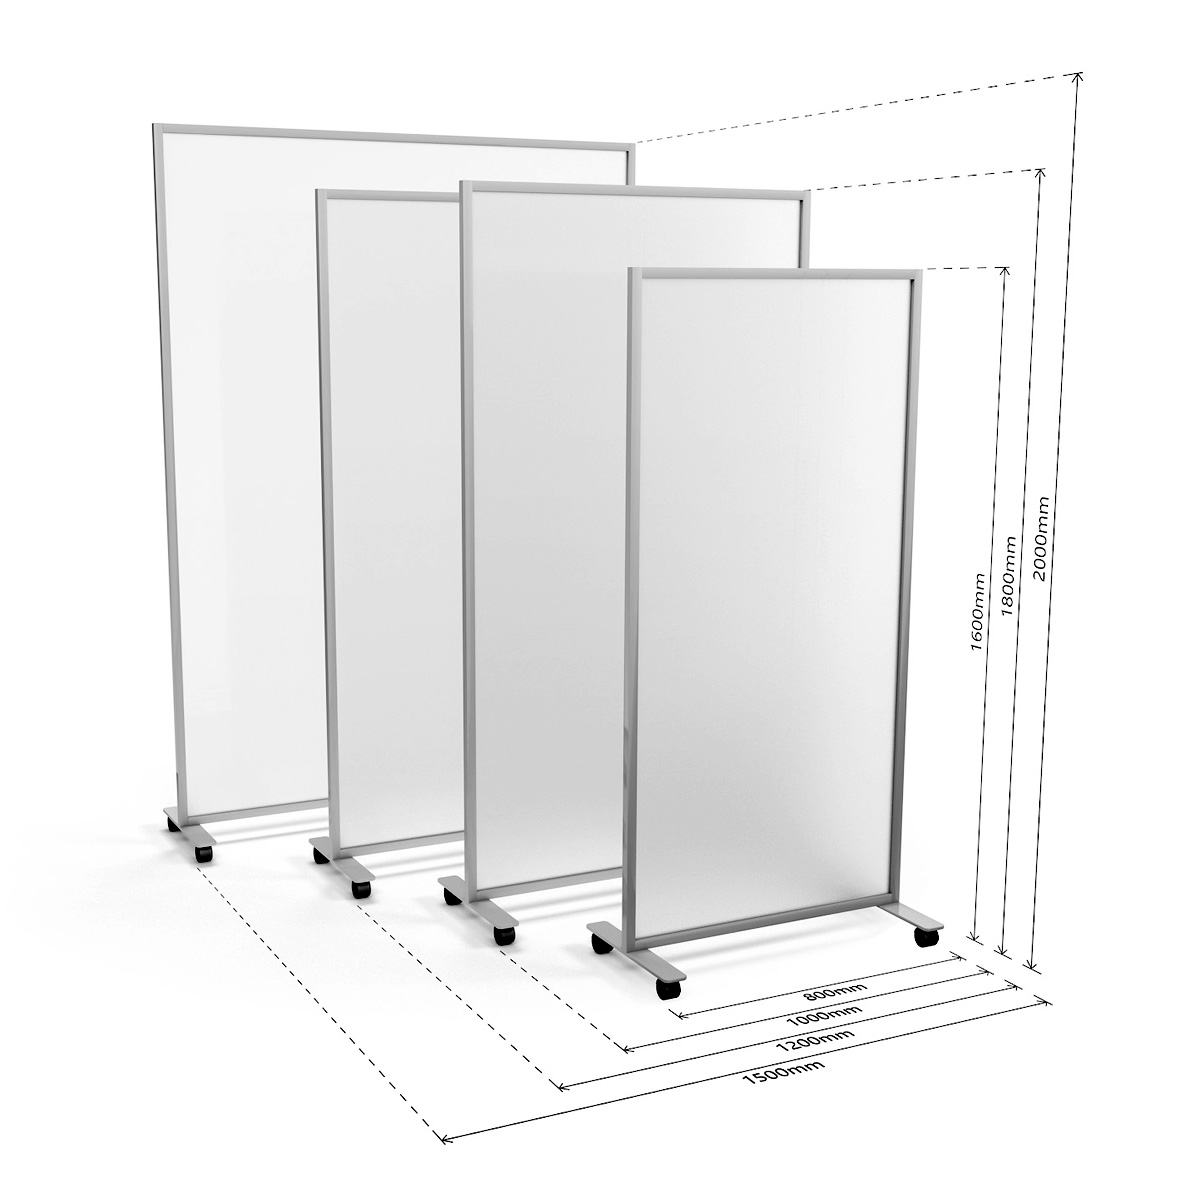 Dimensions of ACHOO® Frosted Perspex® Mobile Office Divider